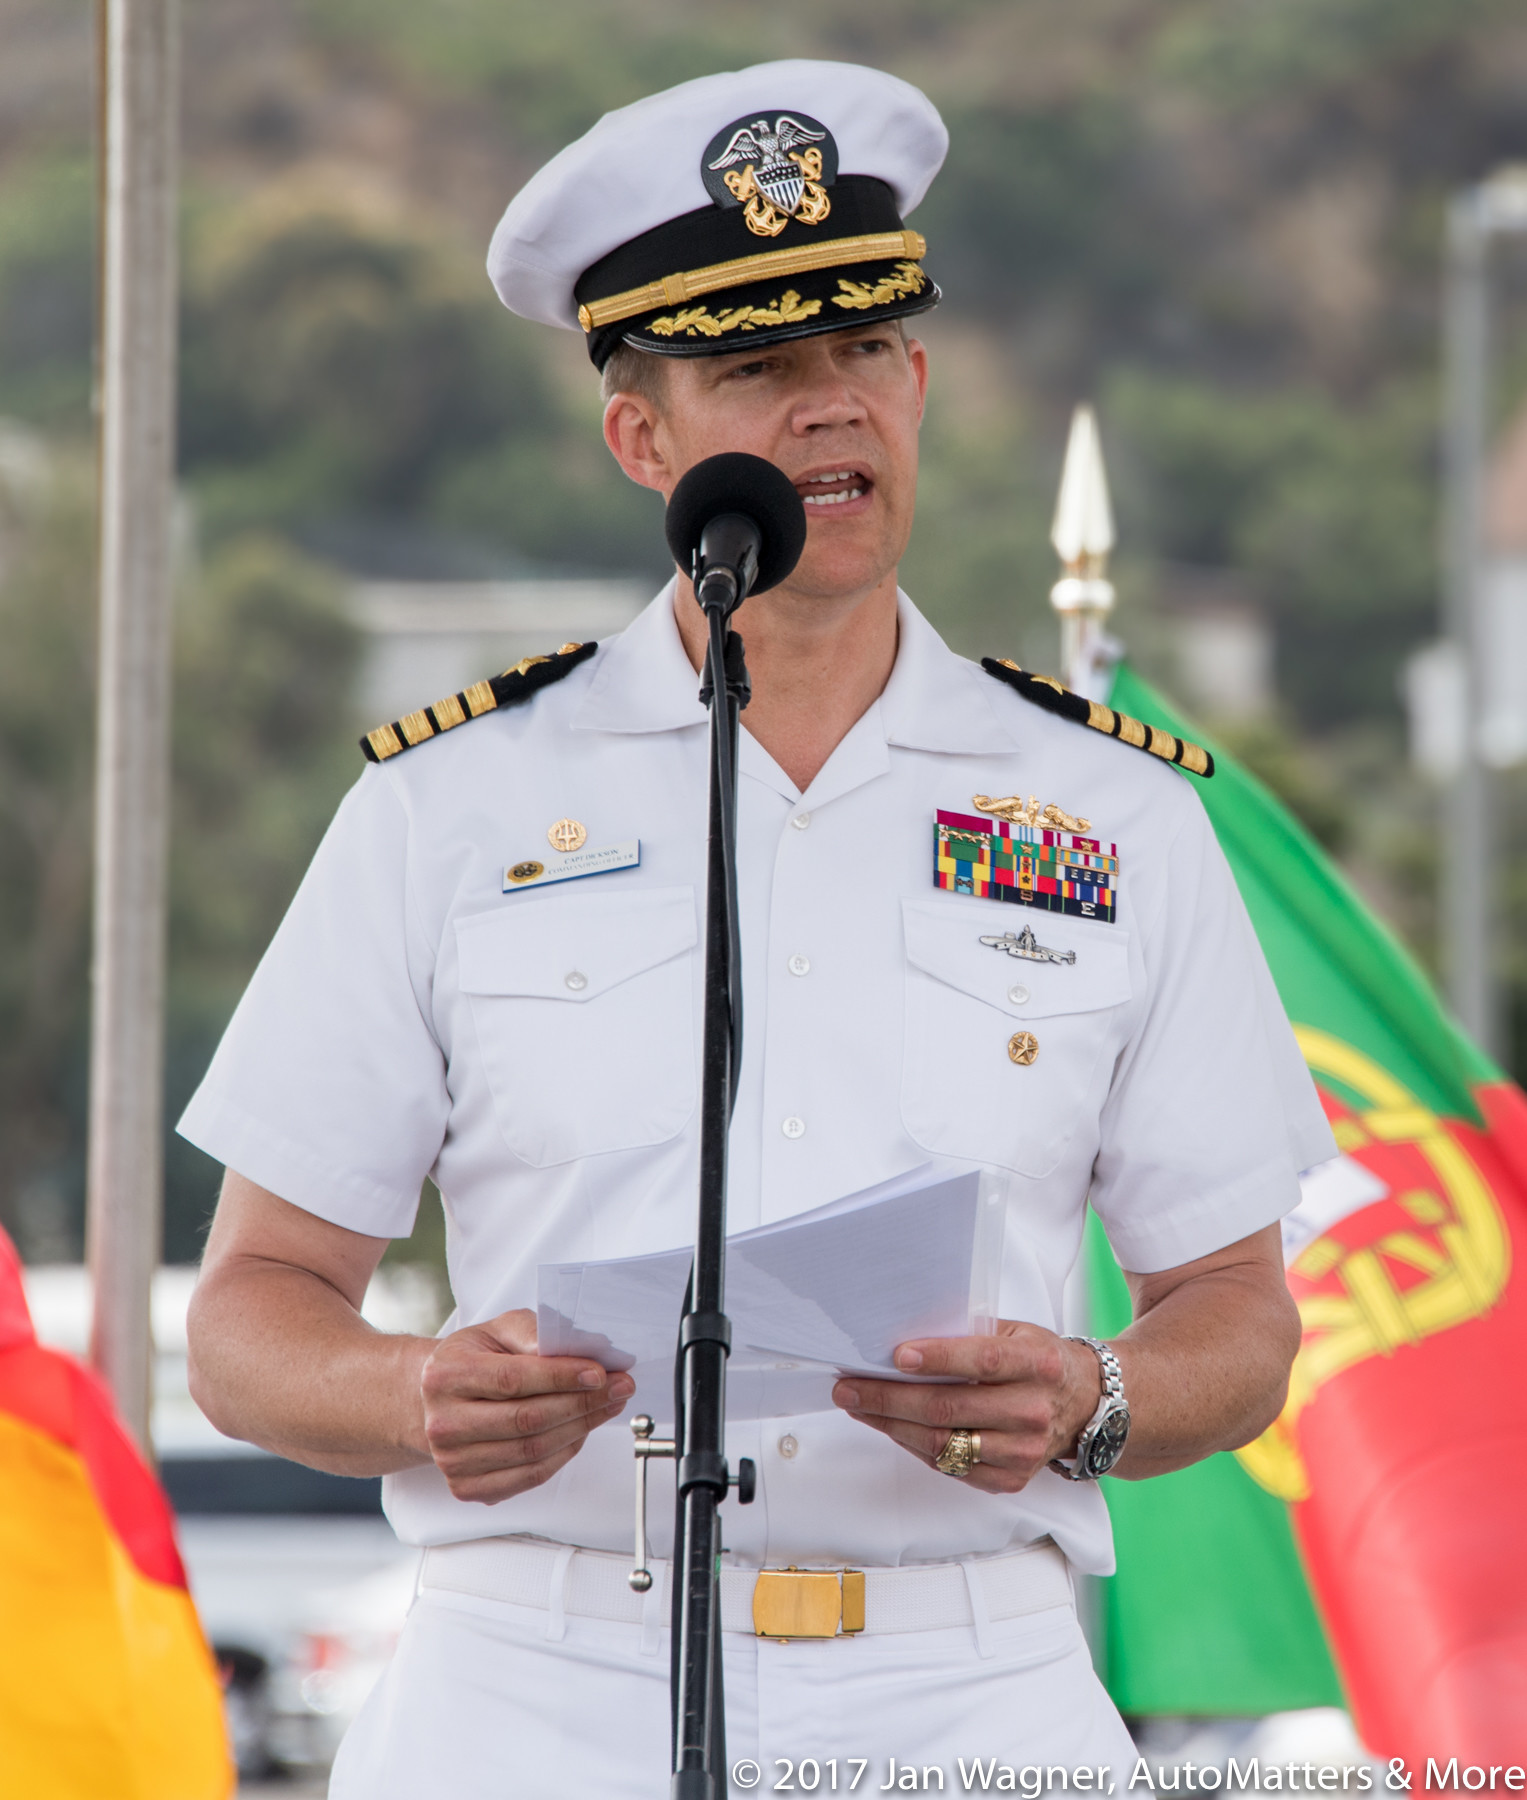 Opening remarks by Captain Dickson, Commanding Officer